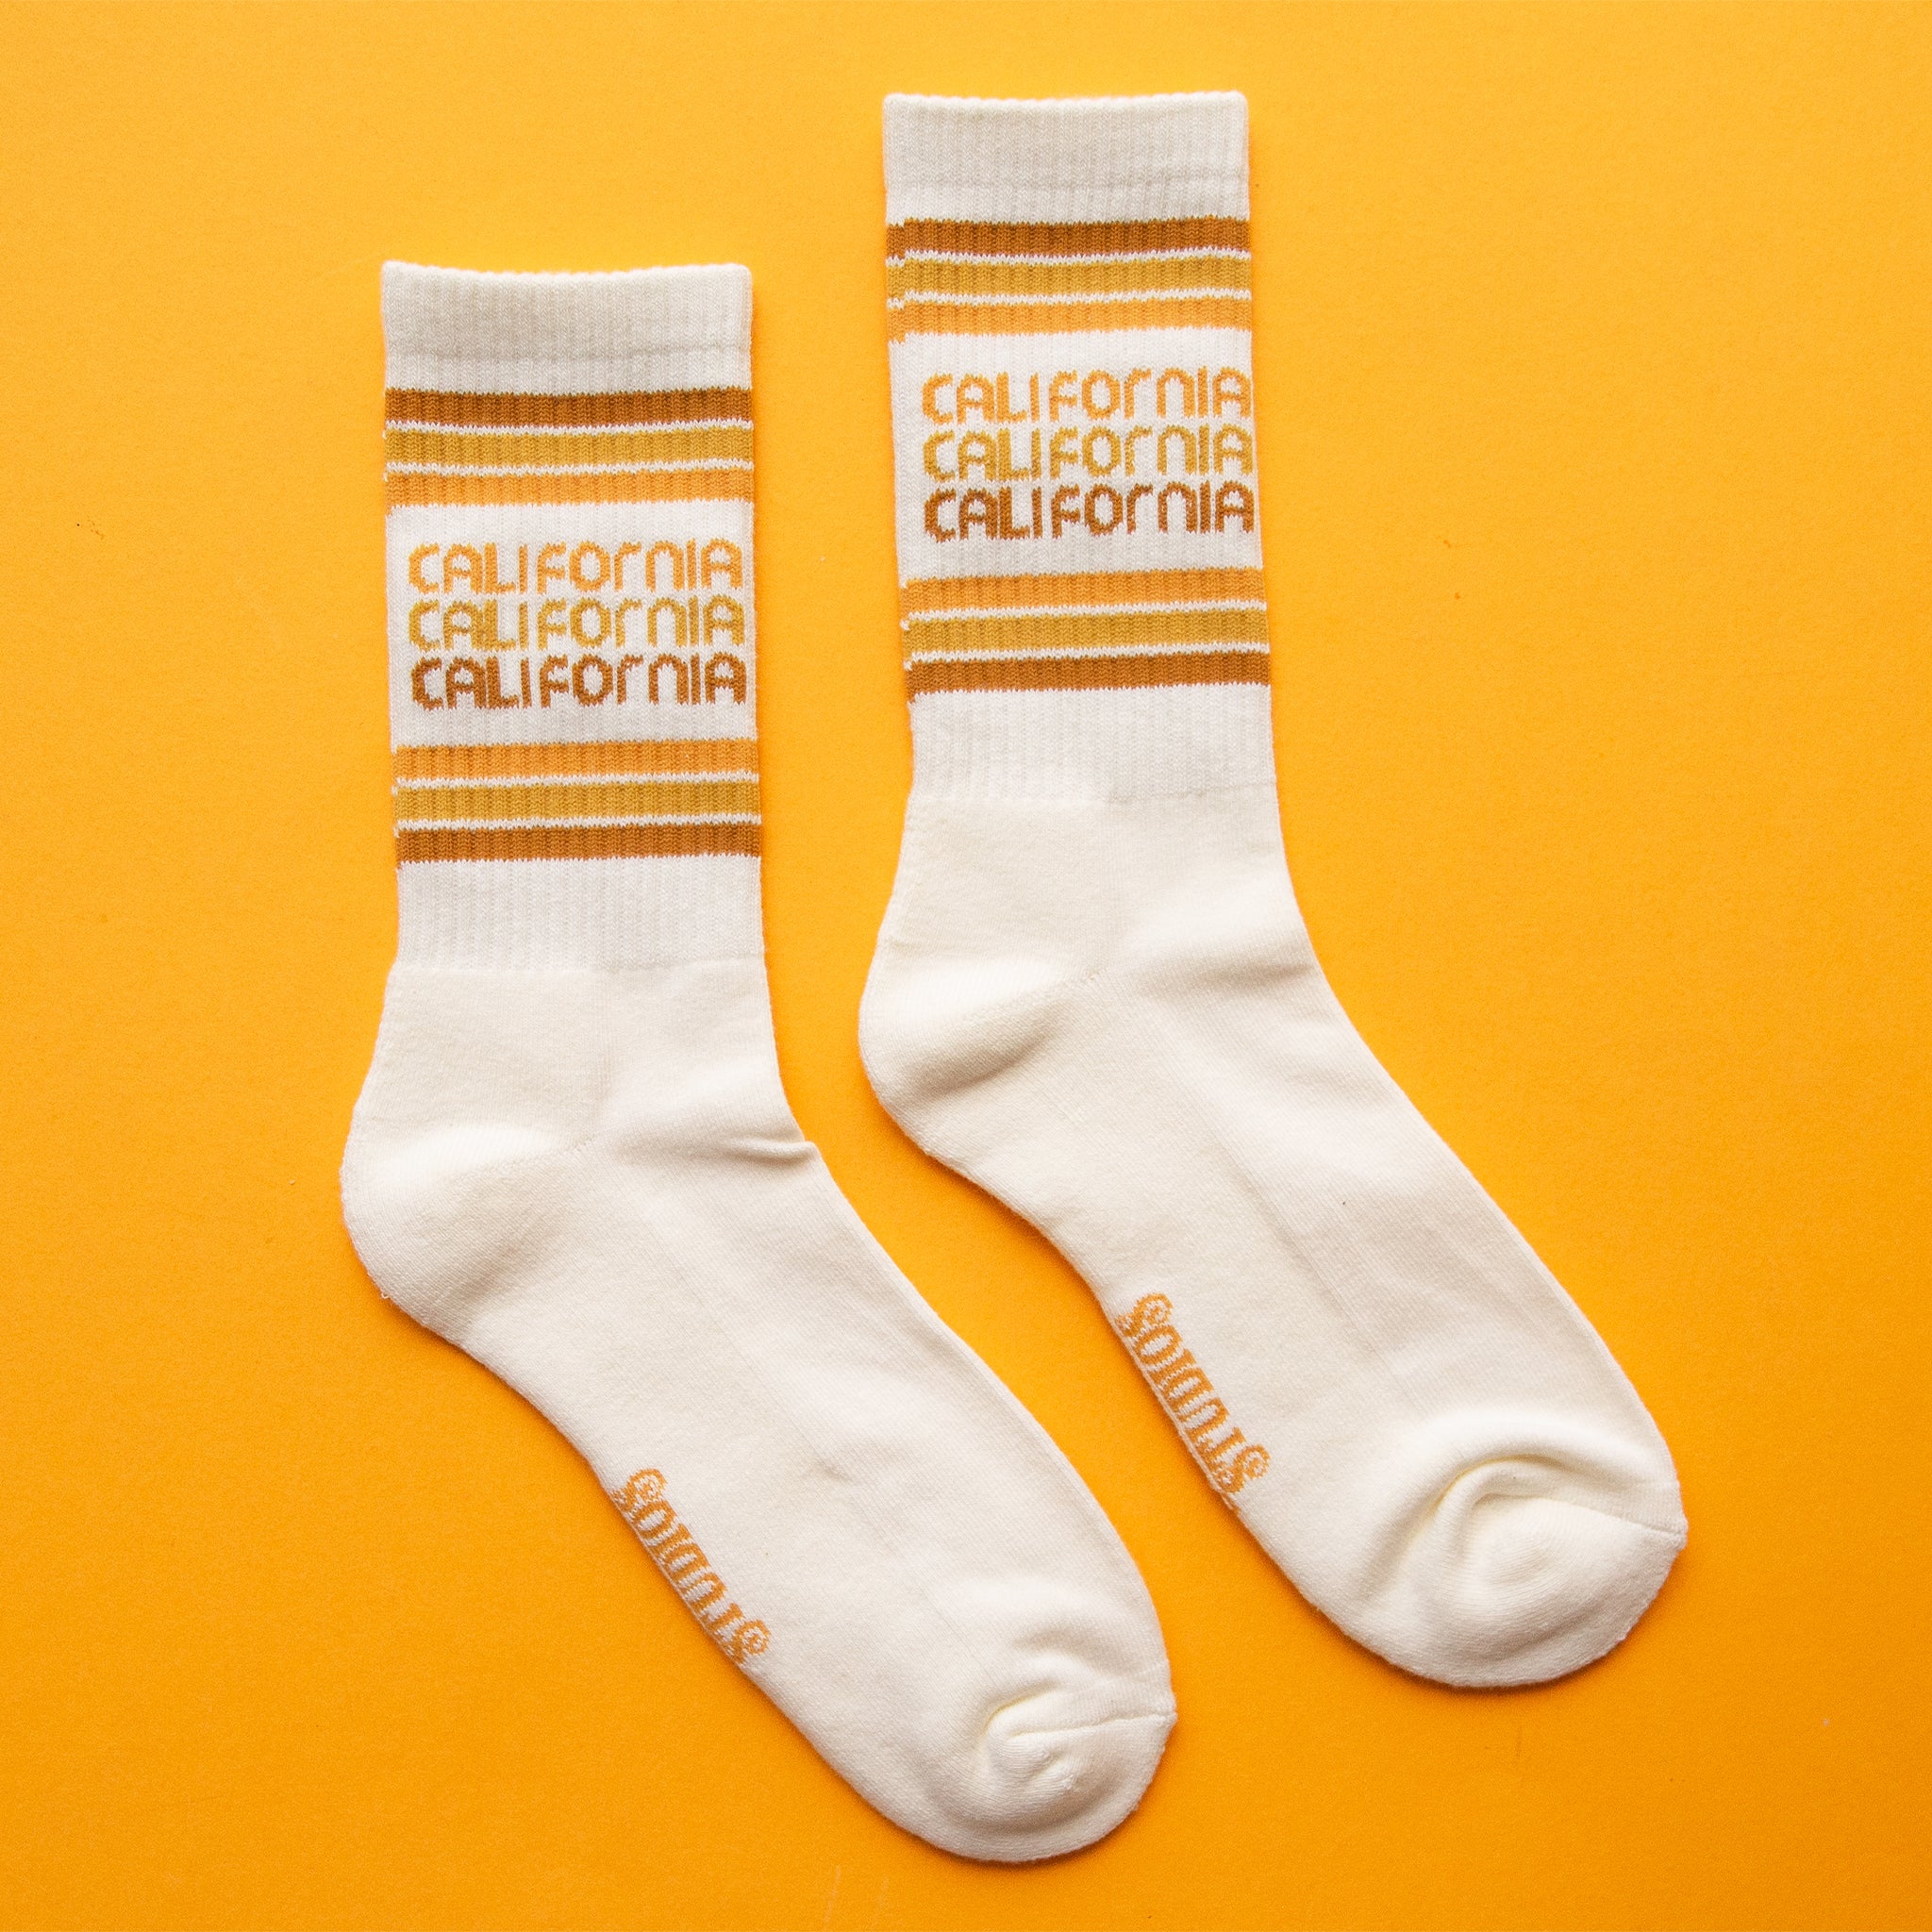 On a yellow background is a white socks with rust, yellow and orange stripes and &quot;california&quot; printed three times on the ankle.